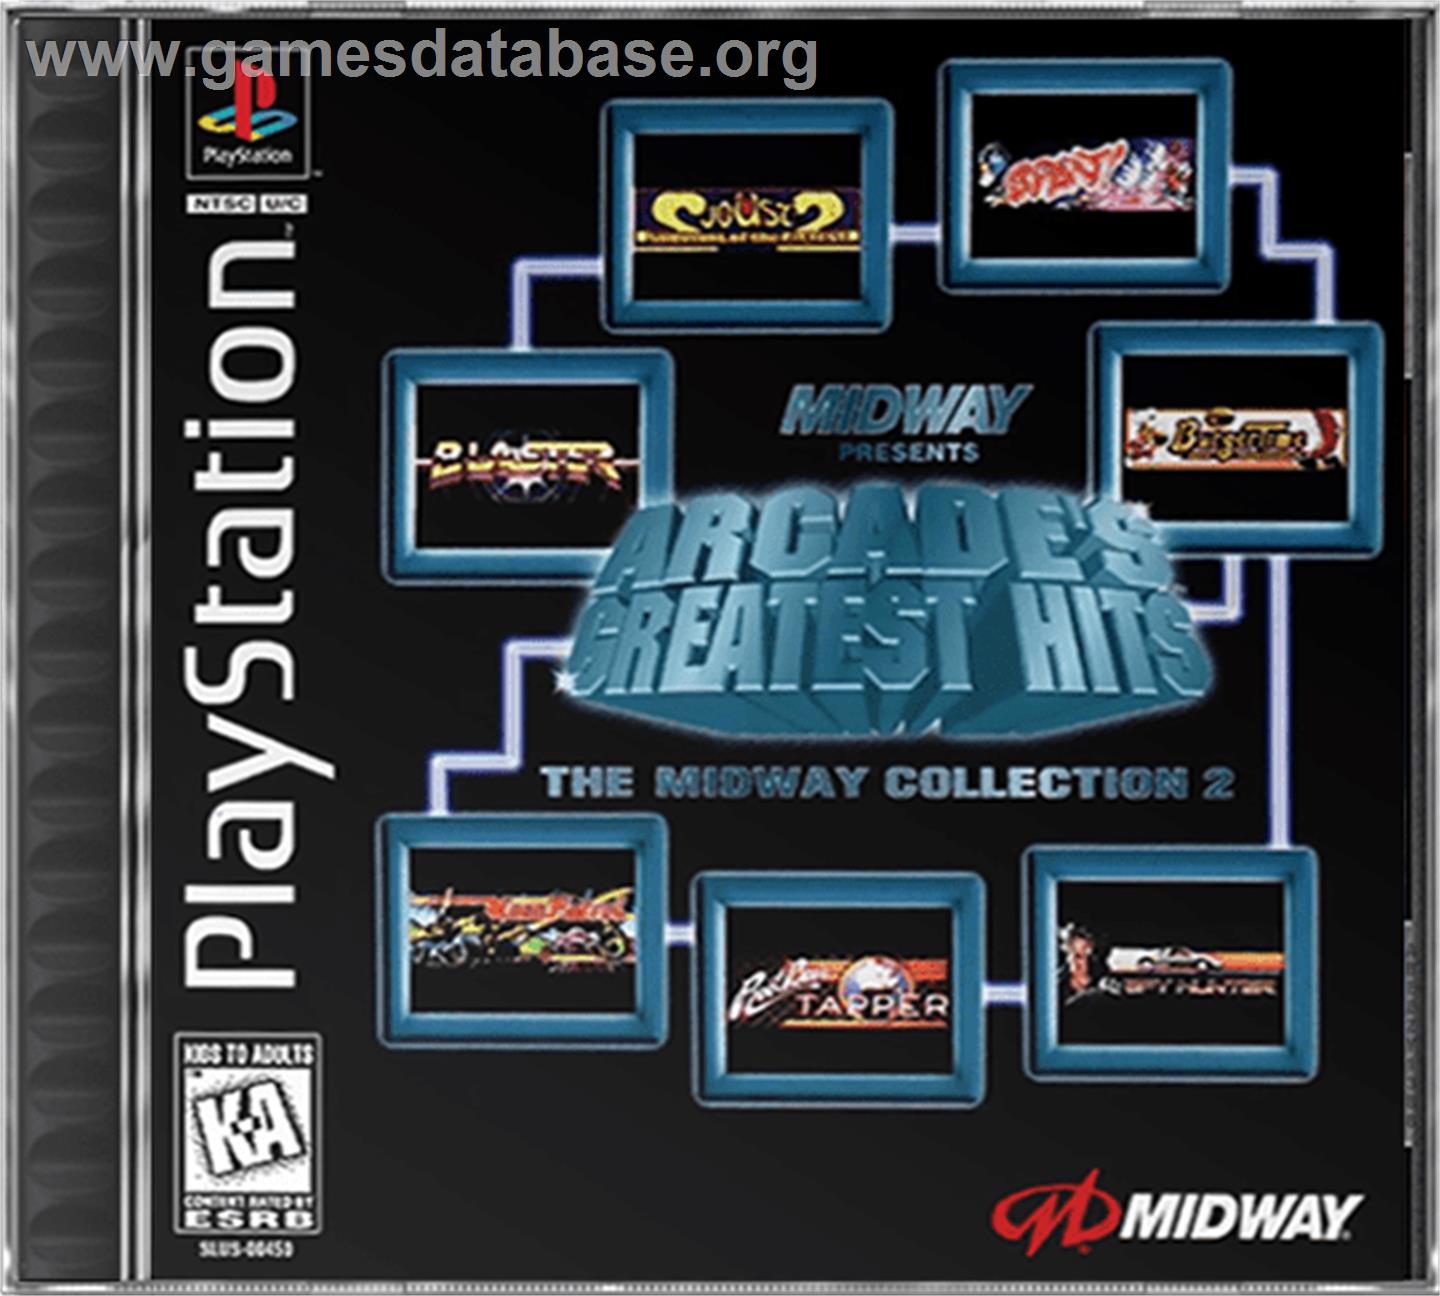 Arcade's Greatest Hits: The Midway Collection 2 - Sony Playstation - Artwork - Box